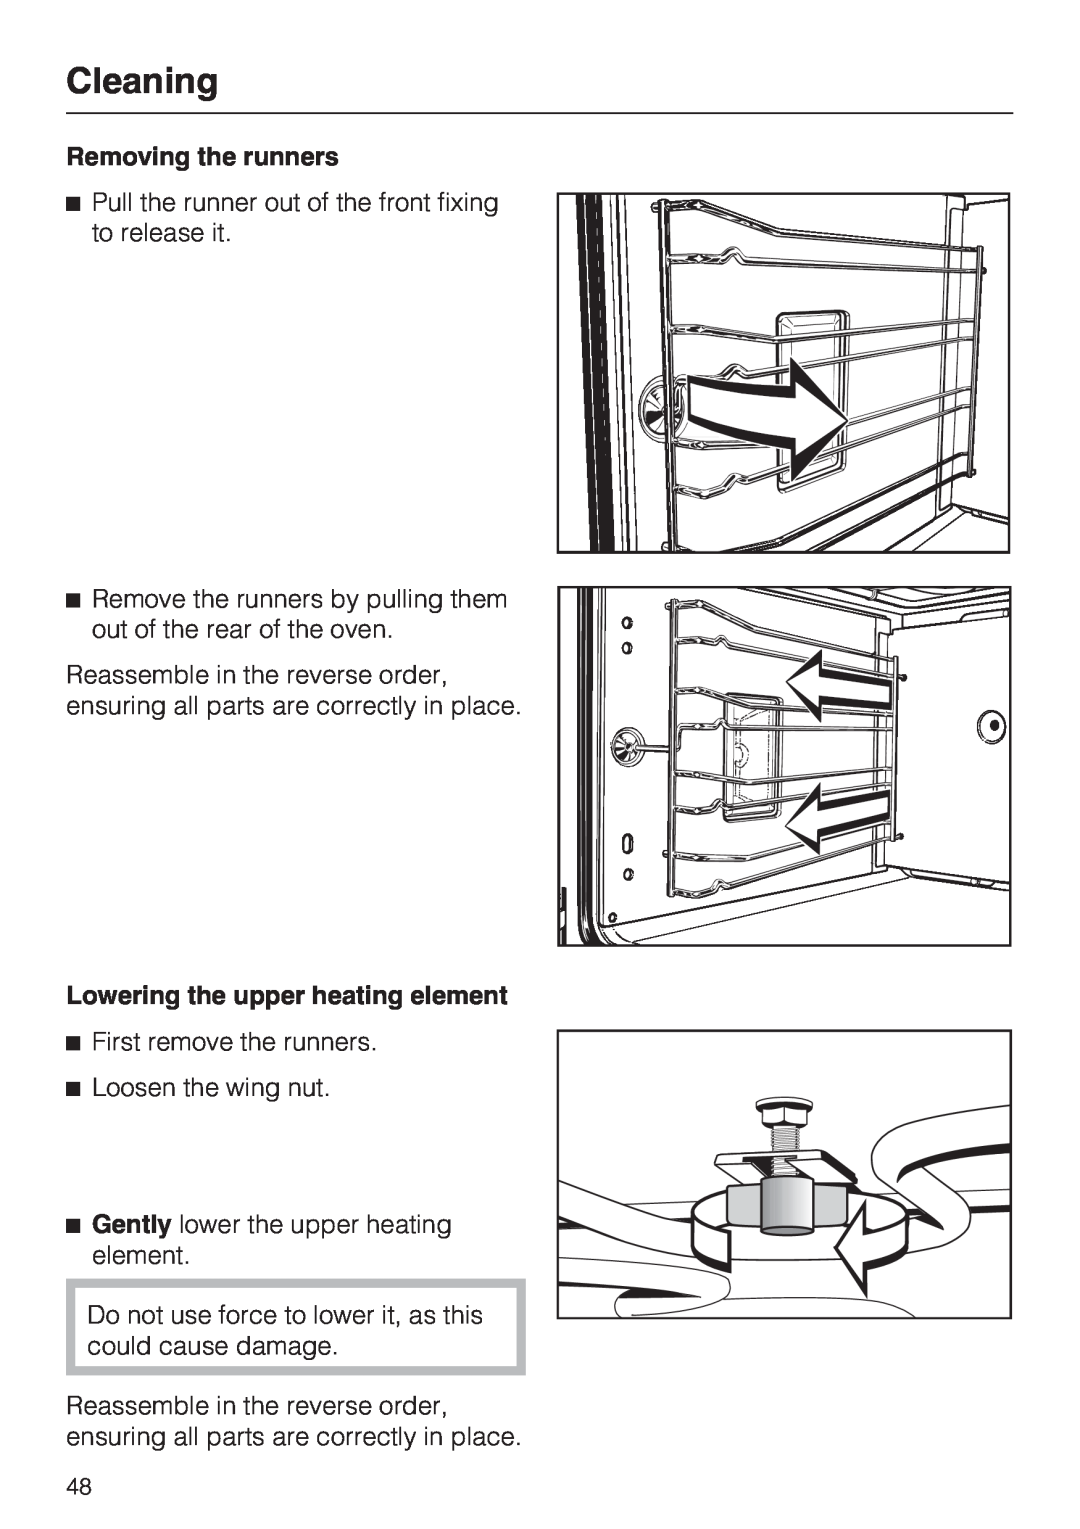 Miele H 4744 BP, H 4746 BP installation instructions Cleaning, Removing the runners, Lowering the upper heating element 